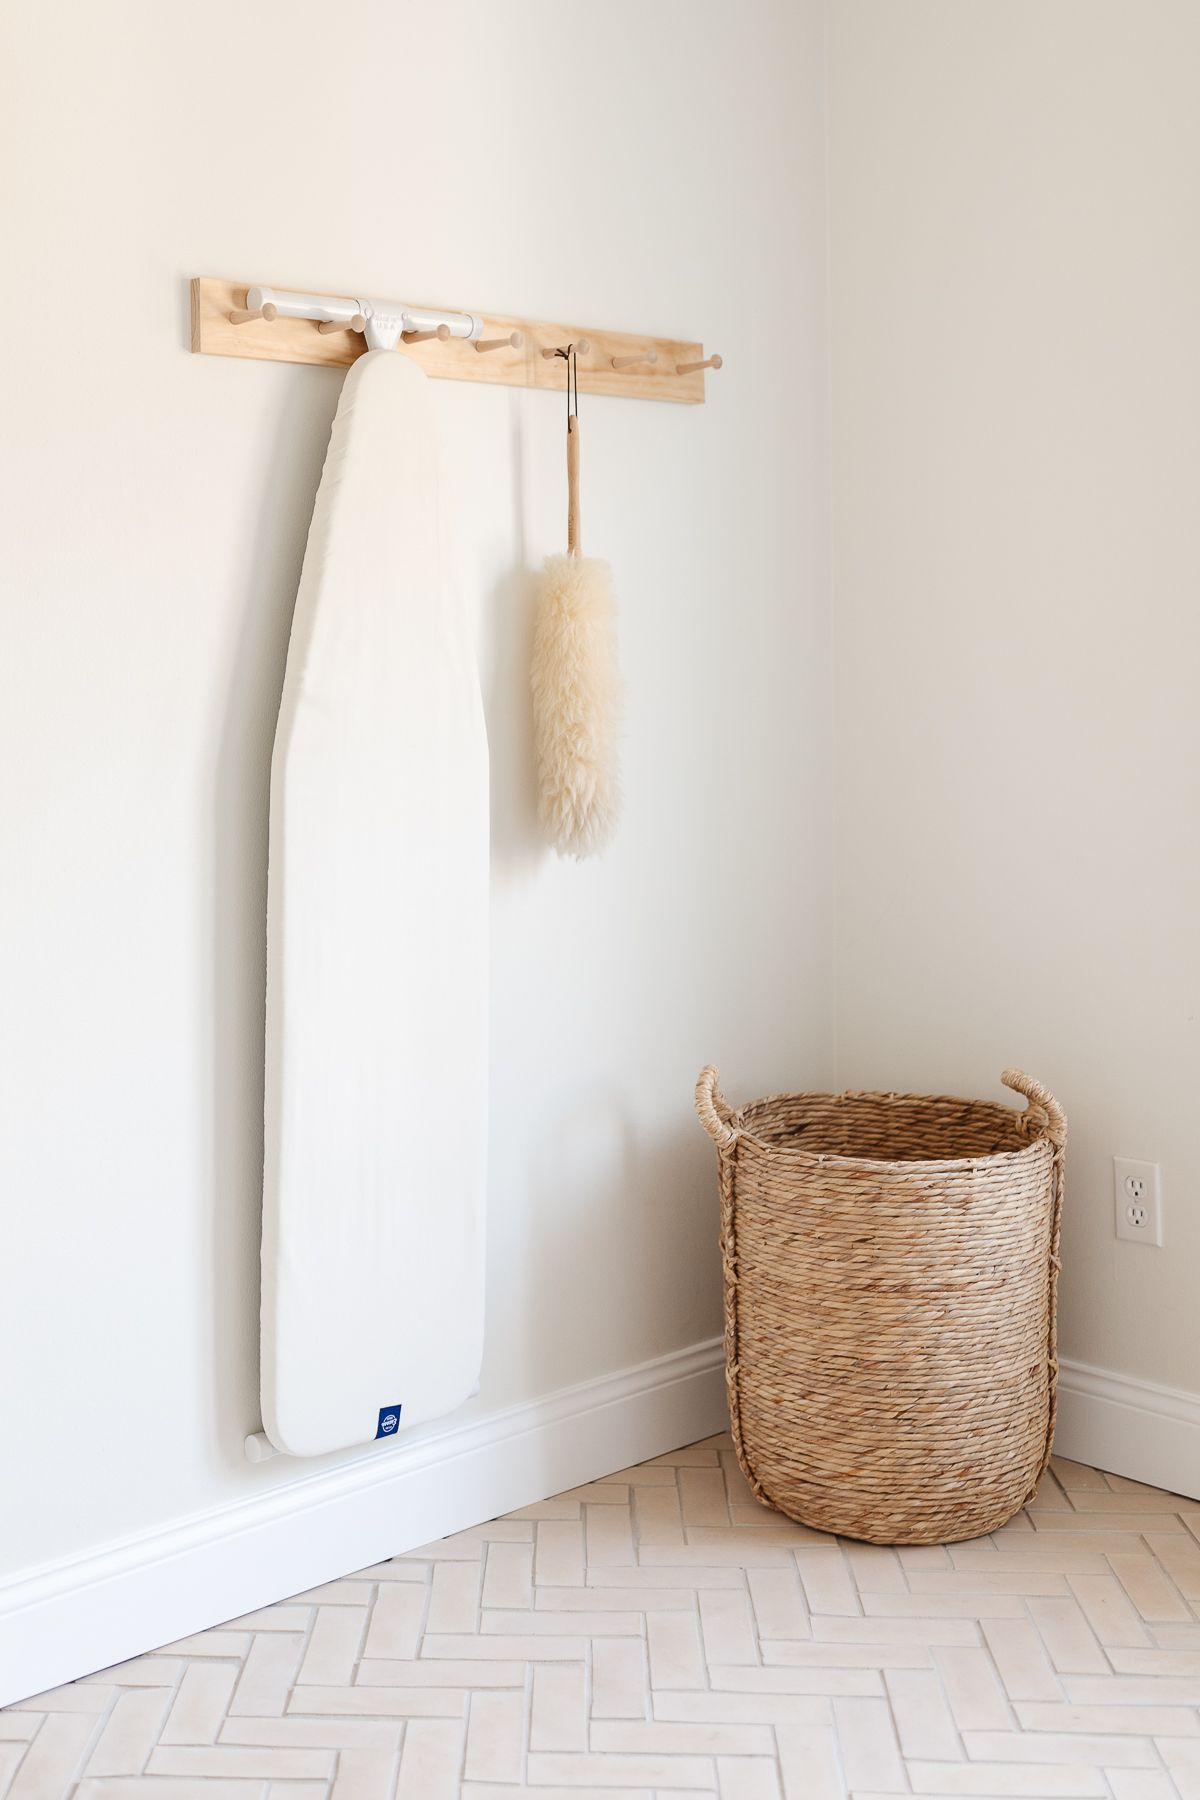 A peg rail on a white wall holding an ironing board and feather duster.